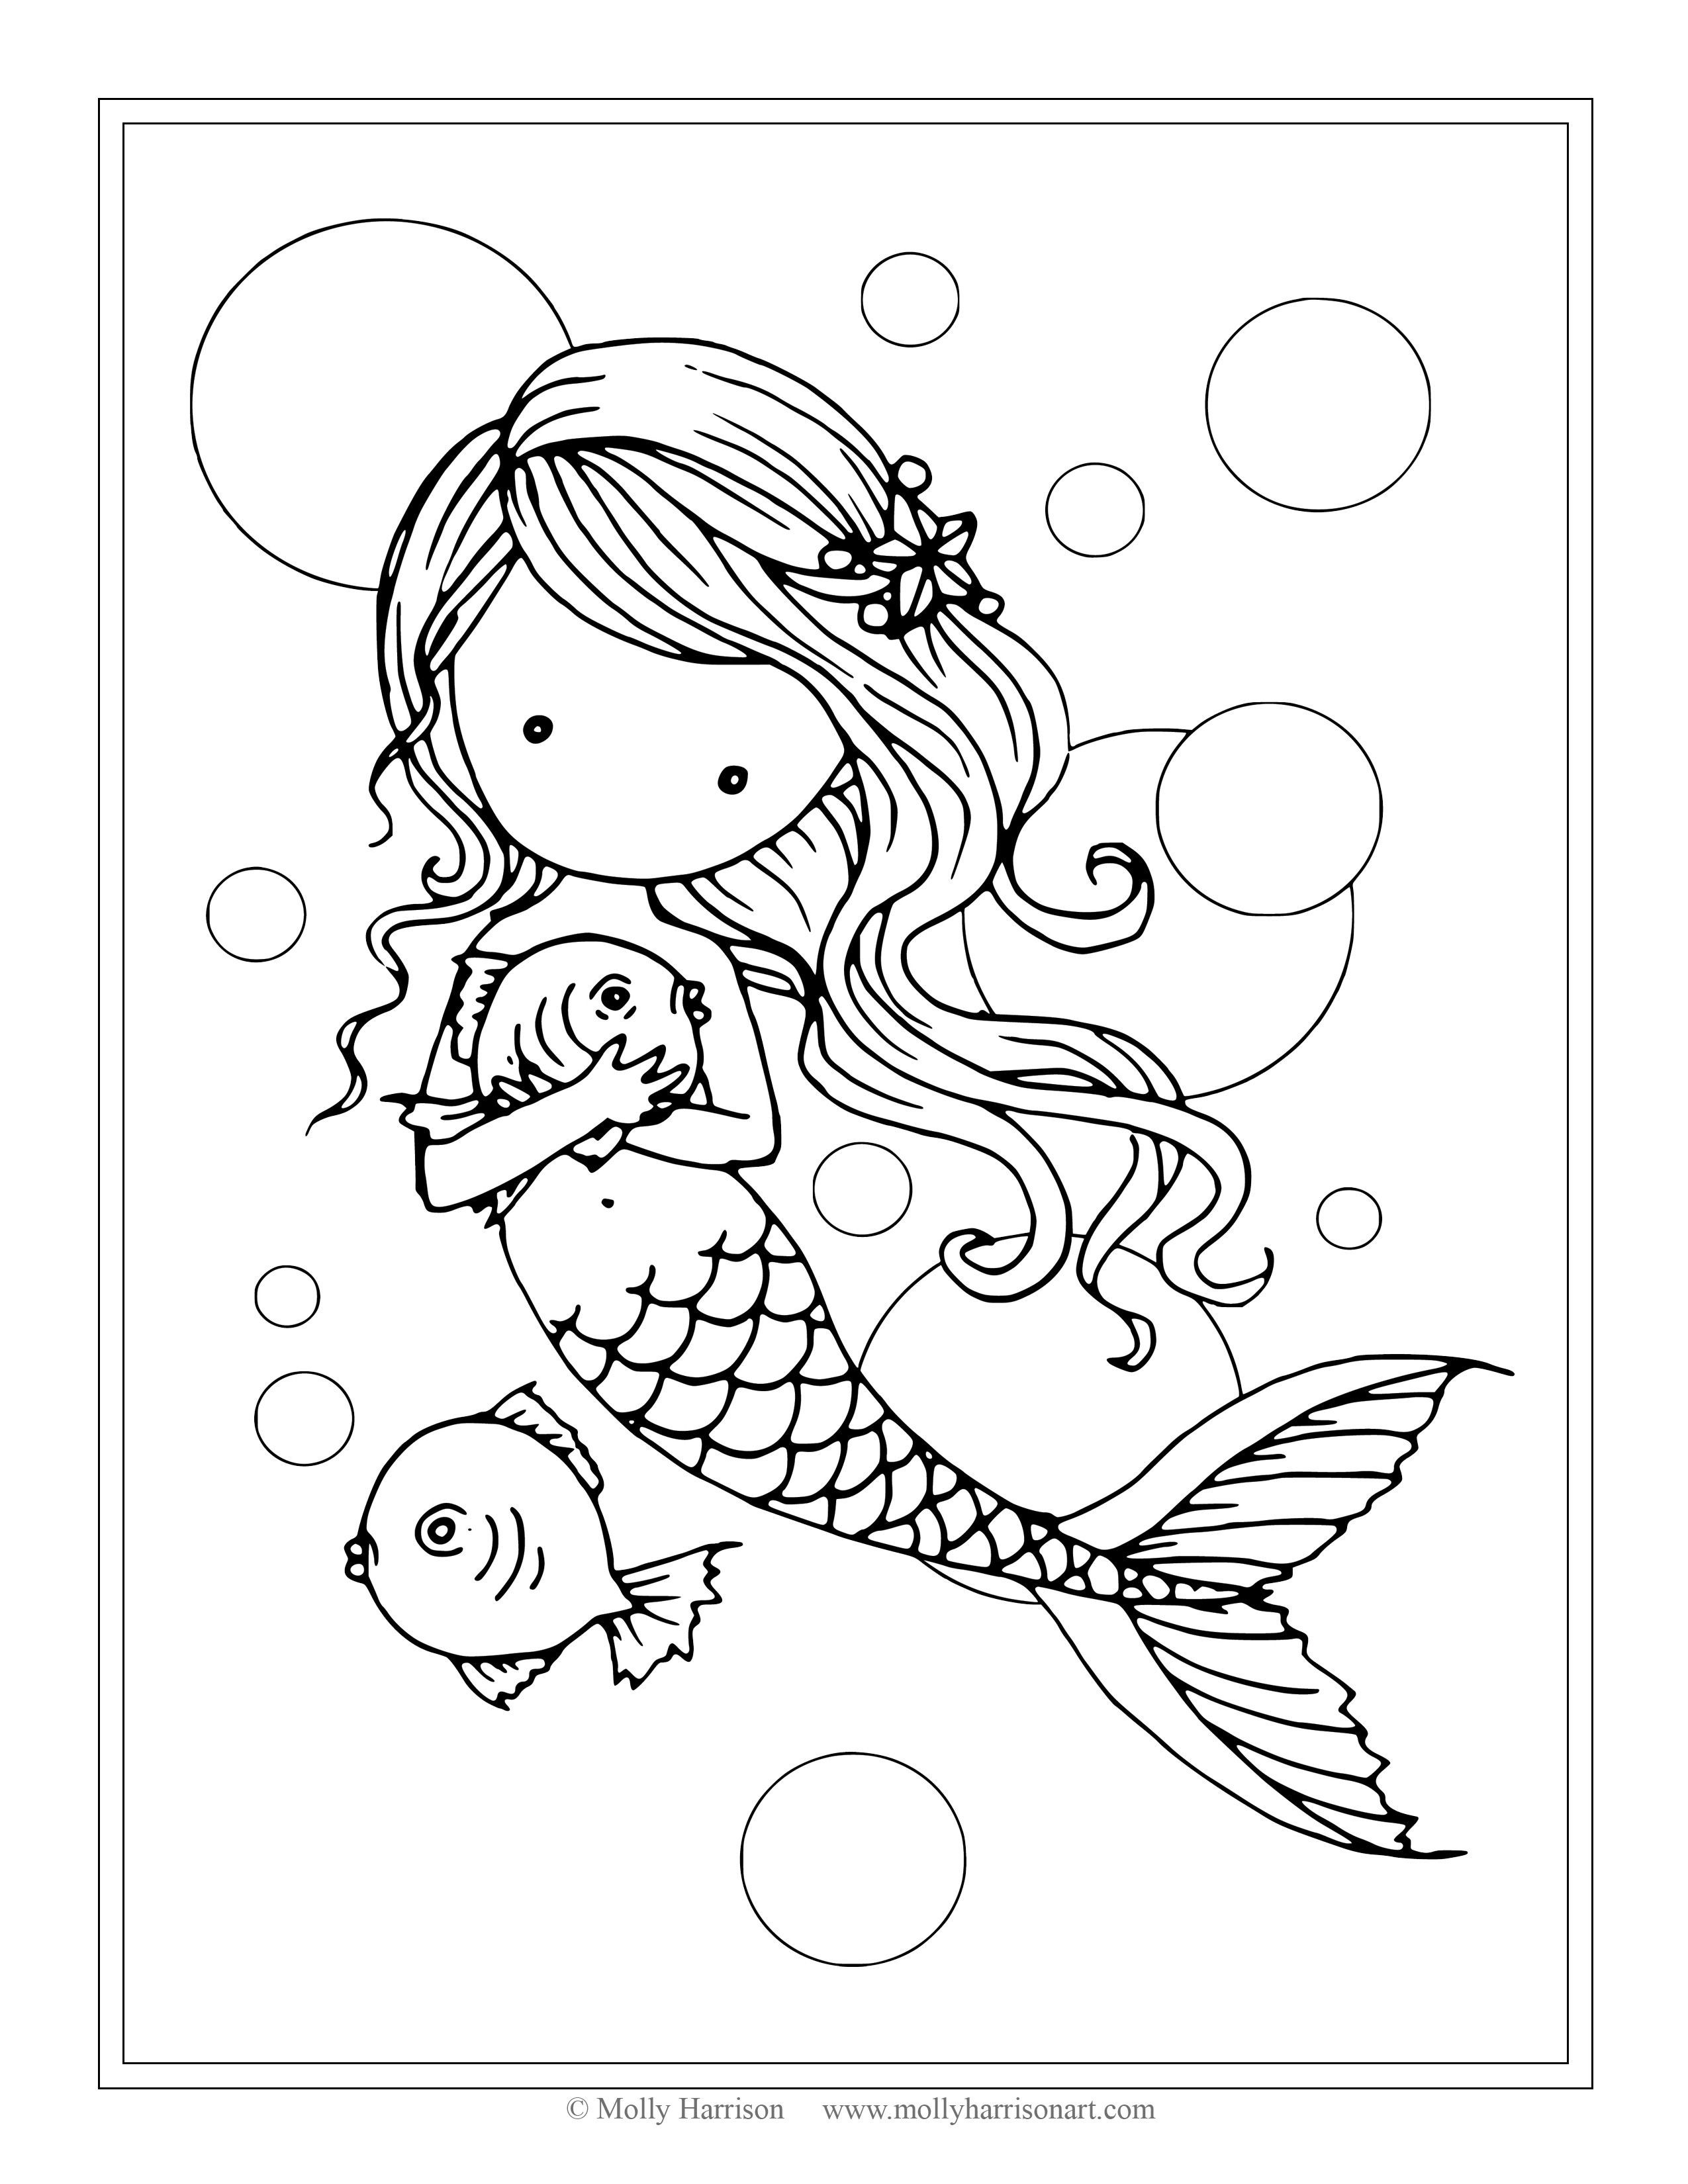 Printable Mermaid Coloring Pages For Girls
 Free Mermaid with Fish Coloring Page by Molly Harrison